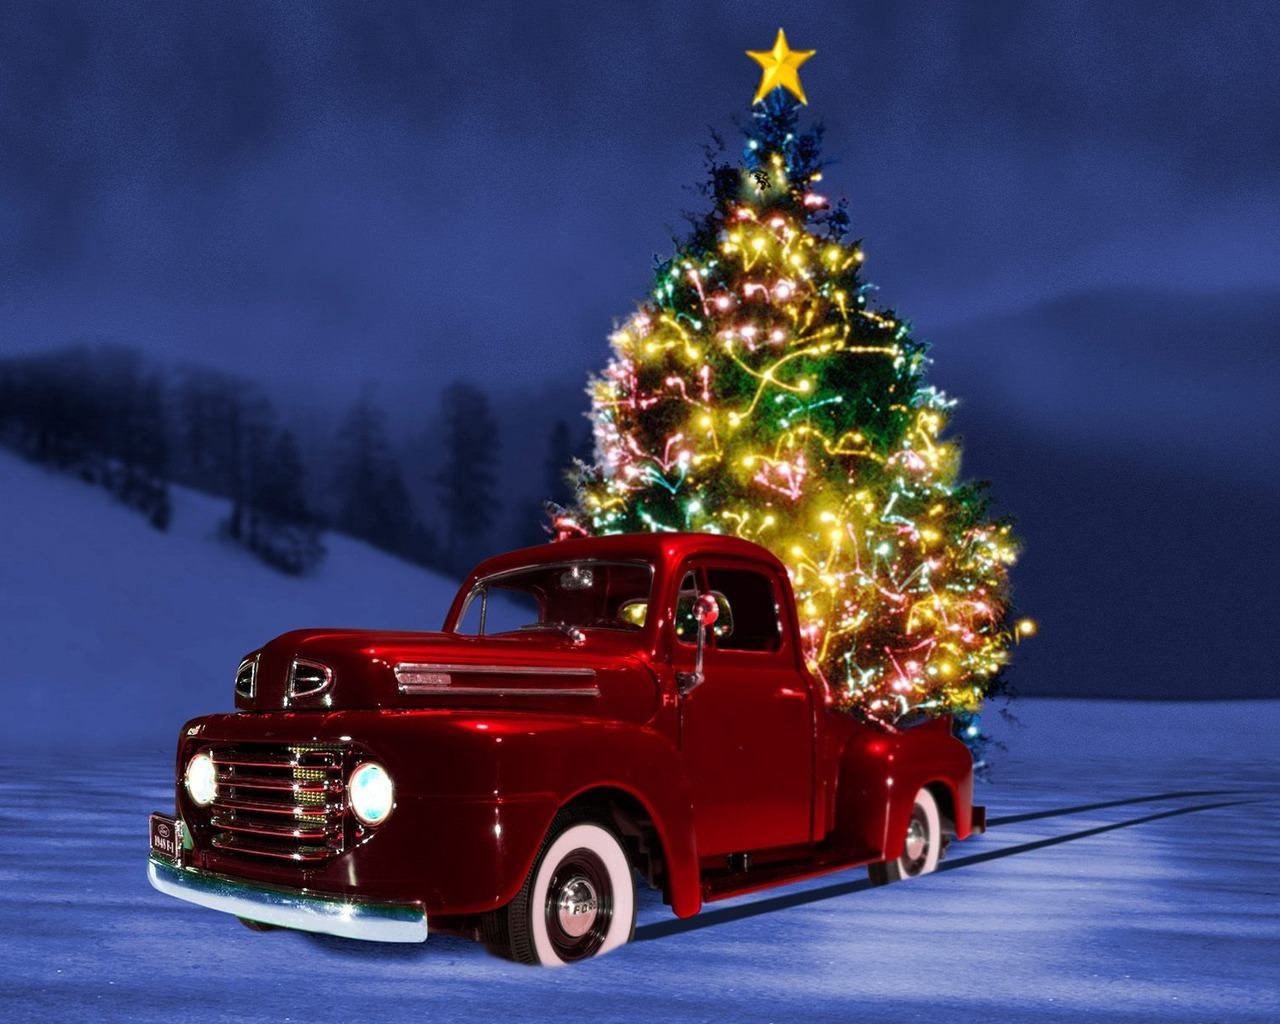 Truck and Christmas Tree